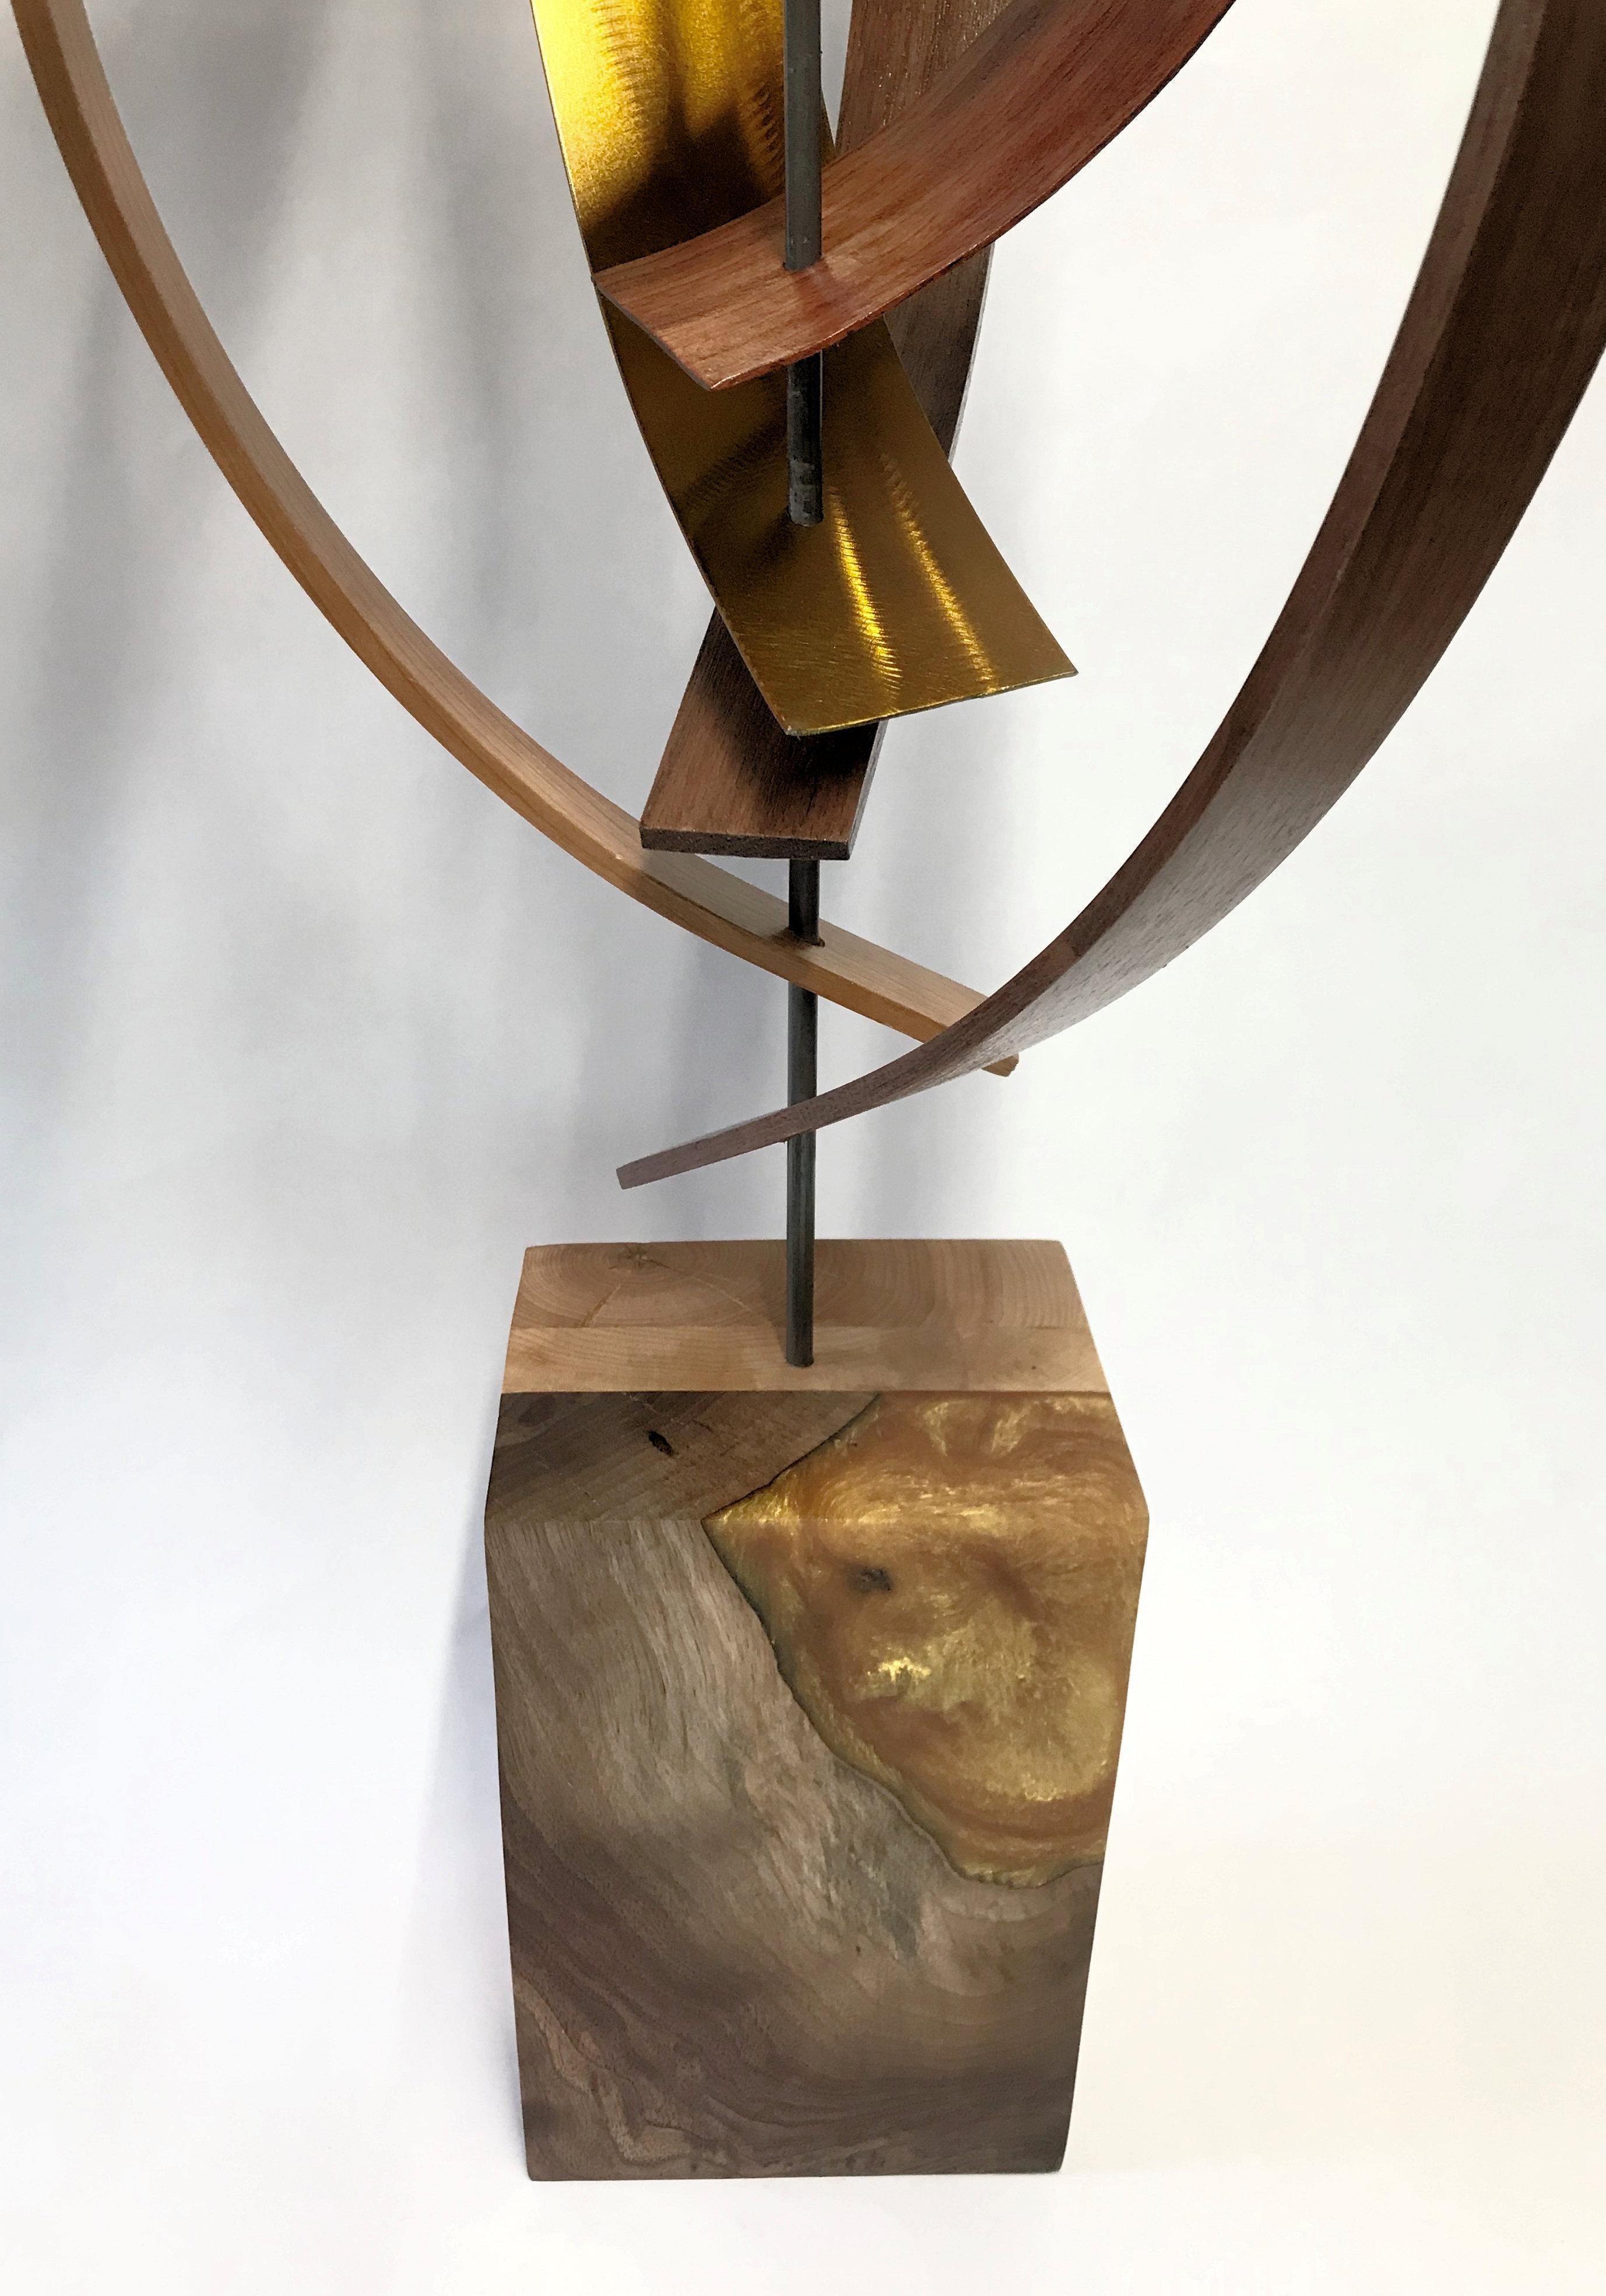 Description:  Black walnut, mahogany, and cherry wood slats are formed and woven together with aluminum slat, grind pattern and gold tint highlights.  The sculpture top is complimented by a walnut and cherry wood base with gold epoxy inlay accent,